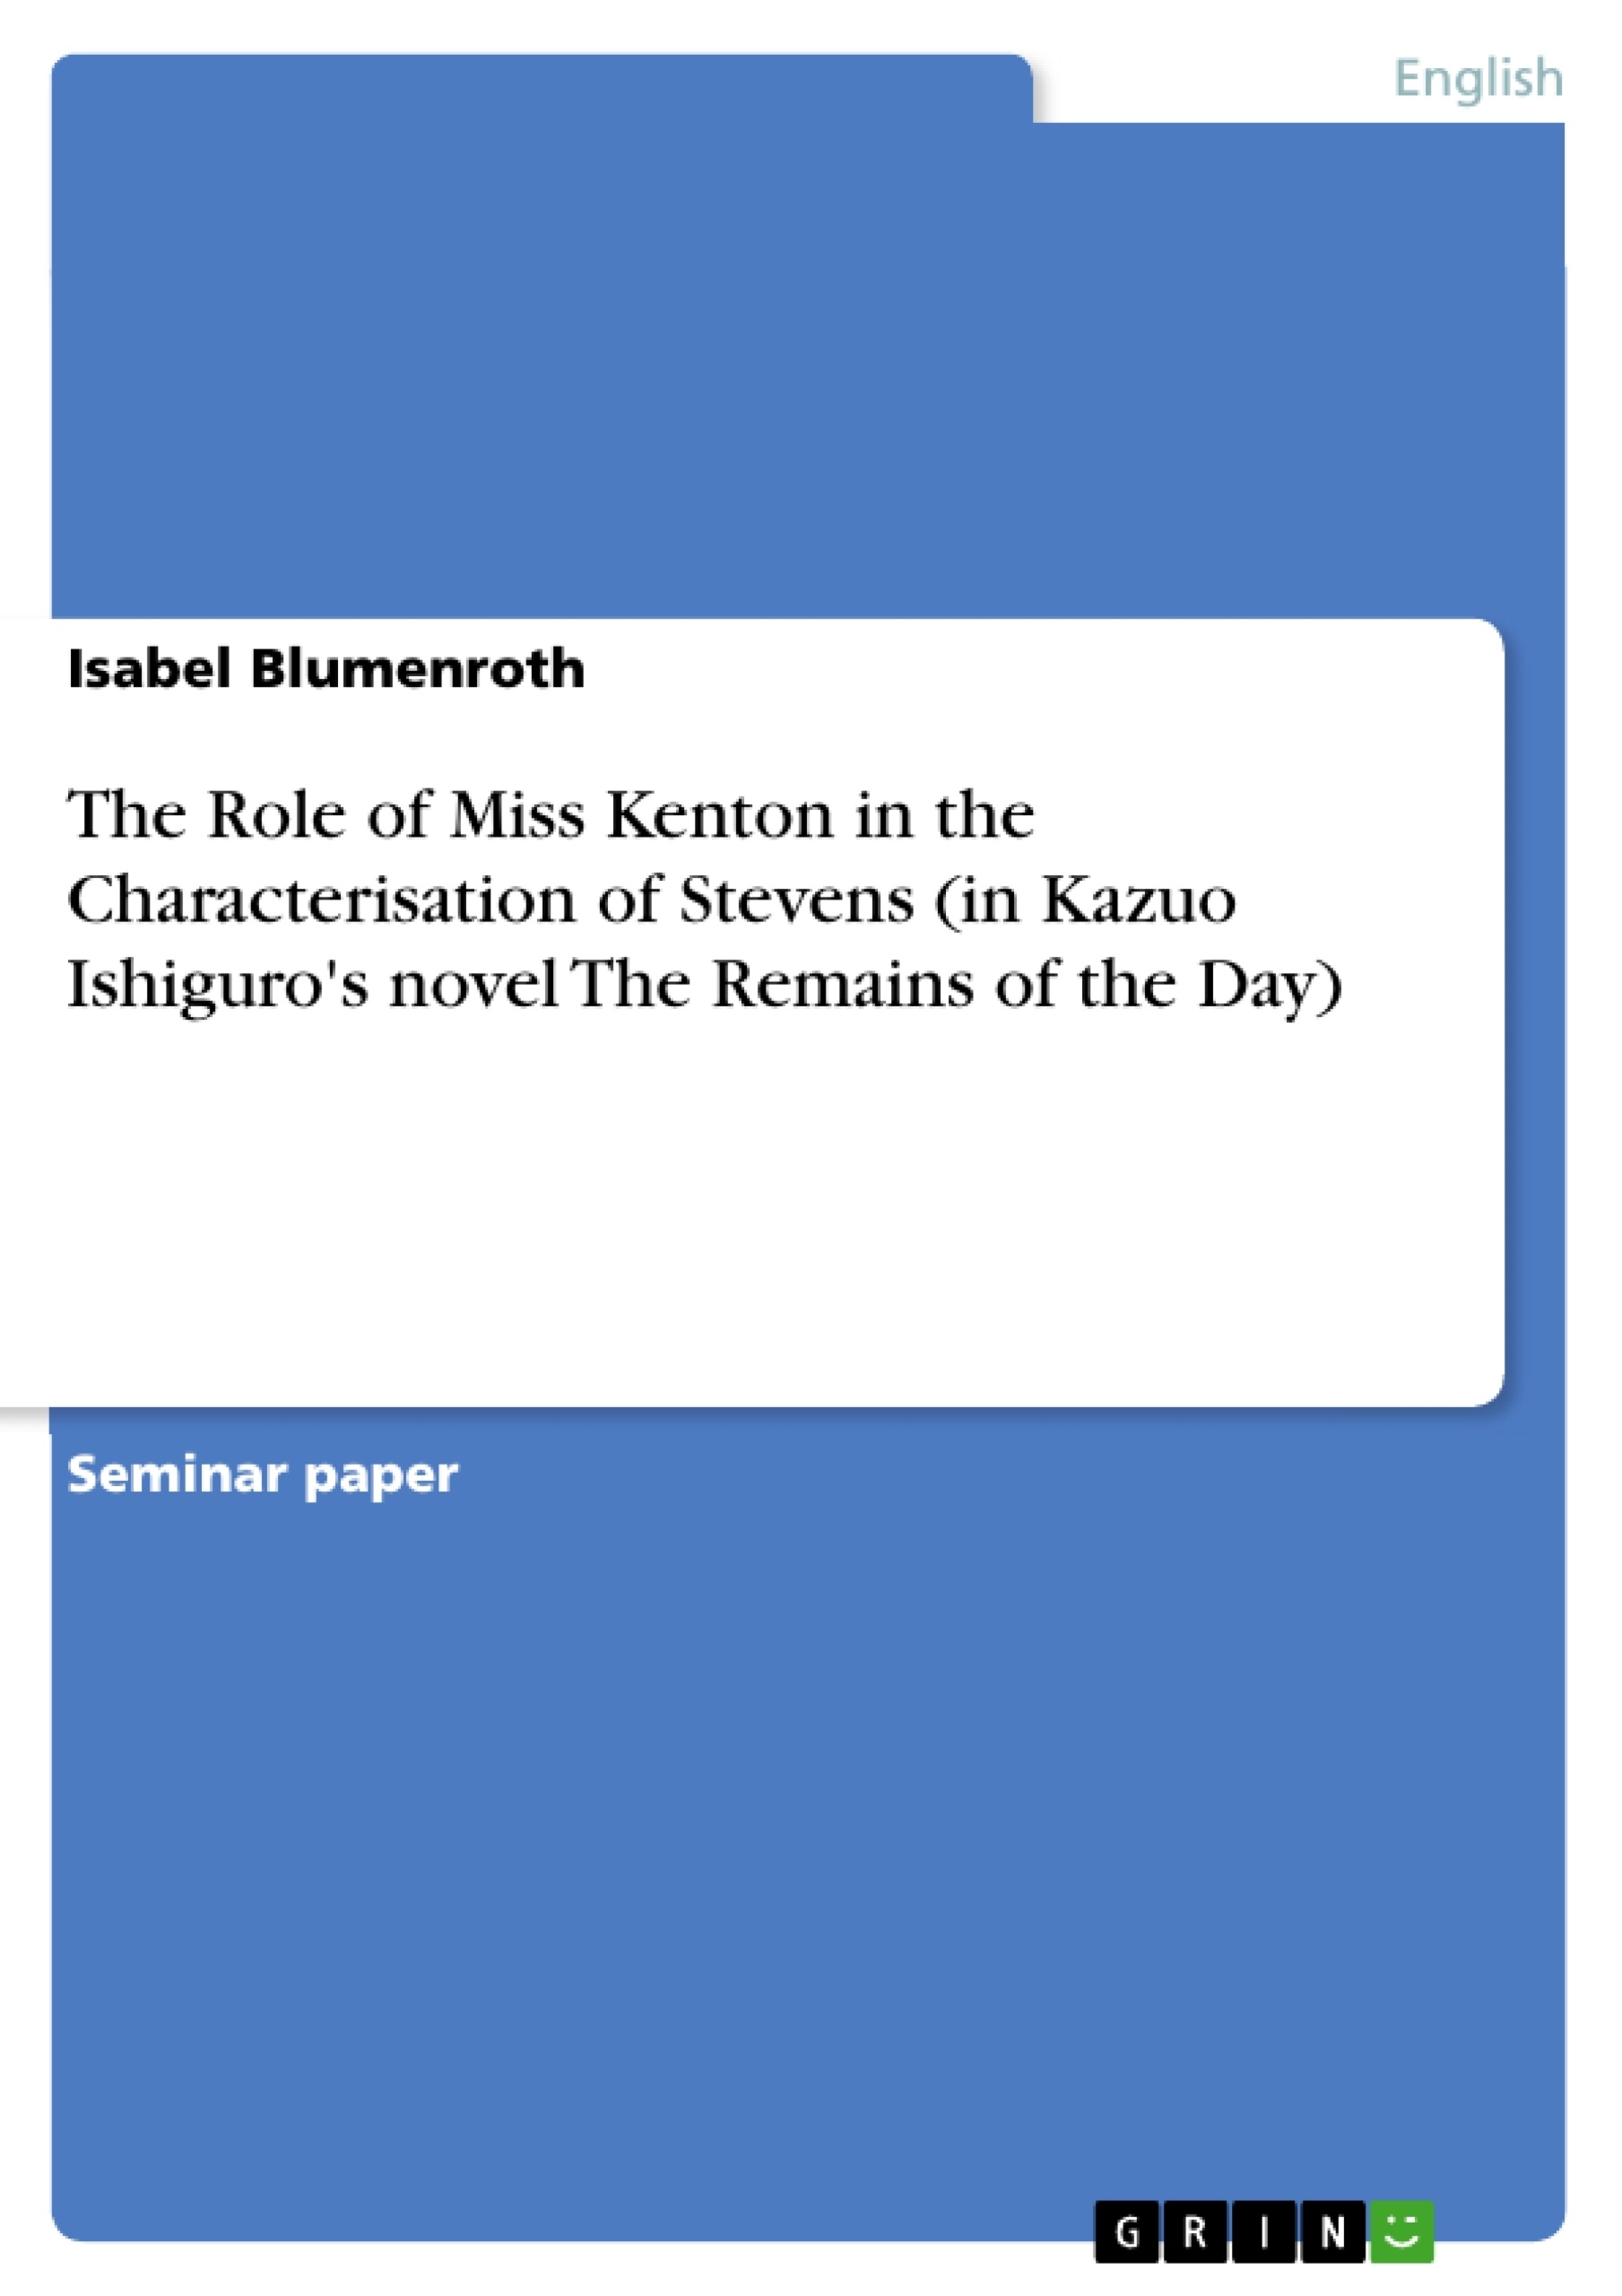 Titre: The Role of Miss Kenton in the Characterisation of Stevens (in Kazuo Ishiguro's novel The Remains of the Day)